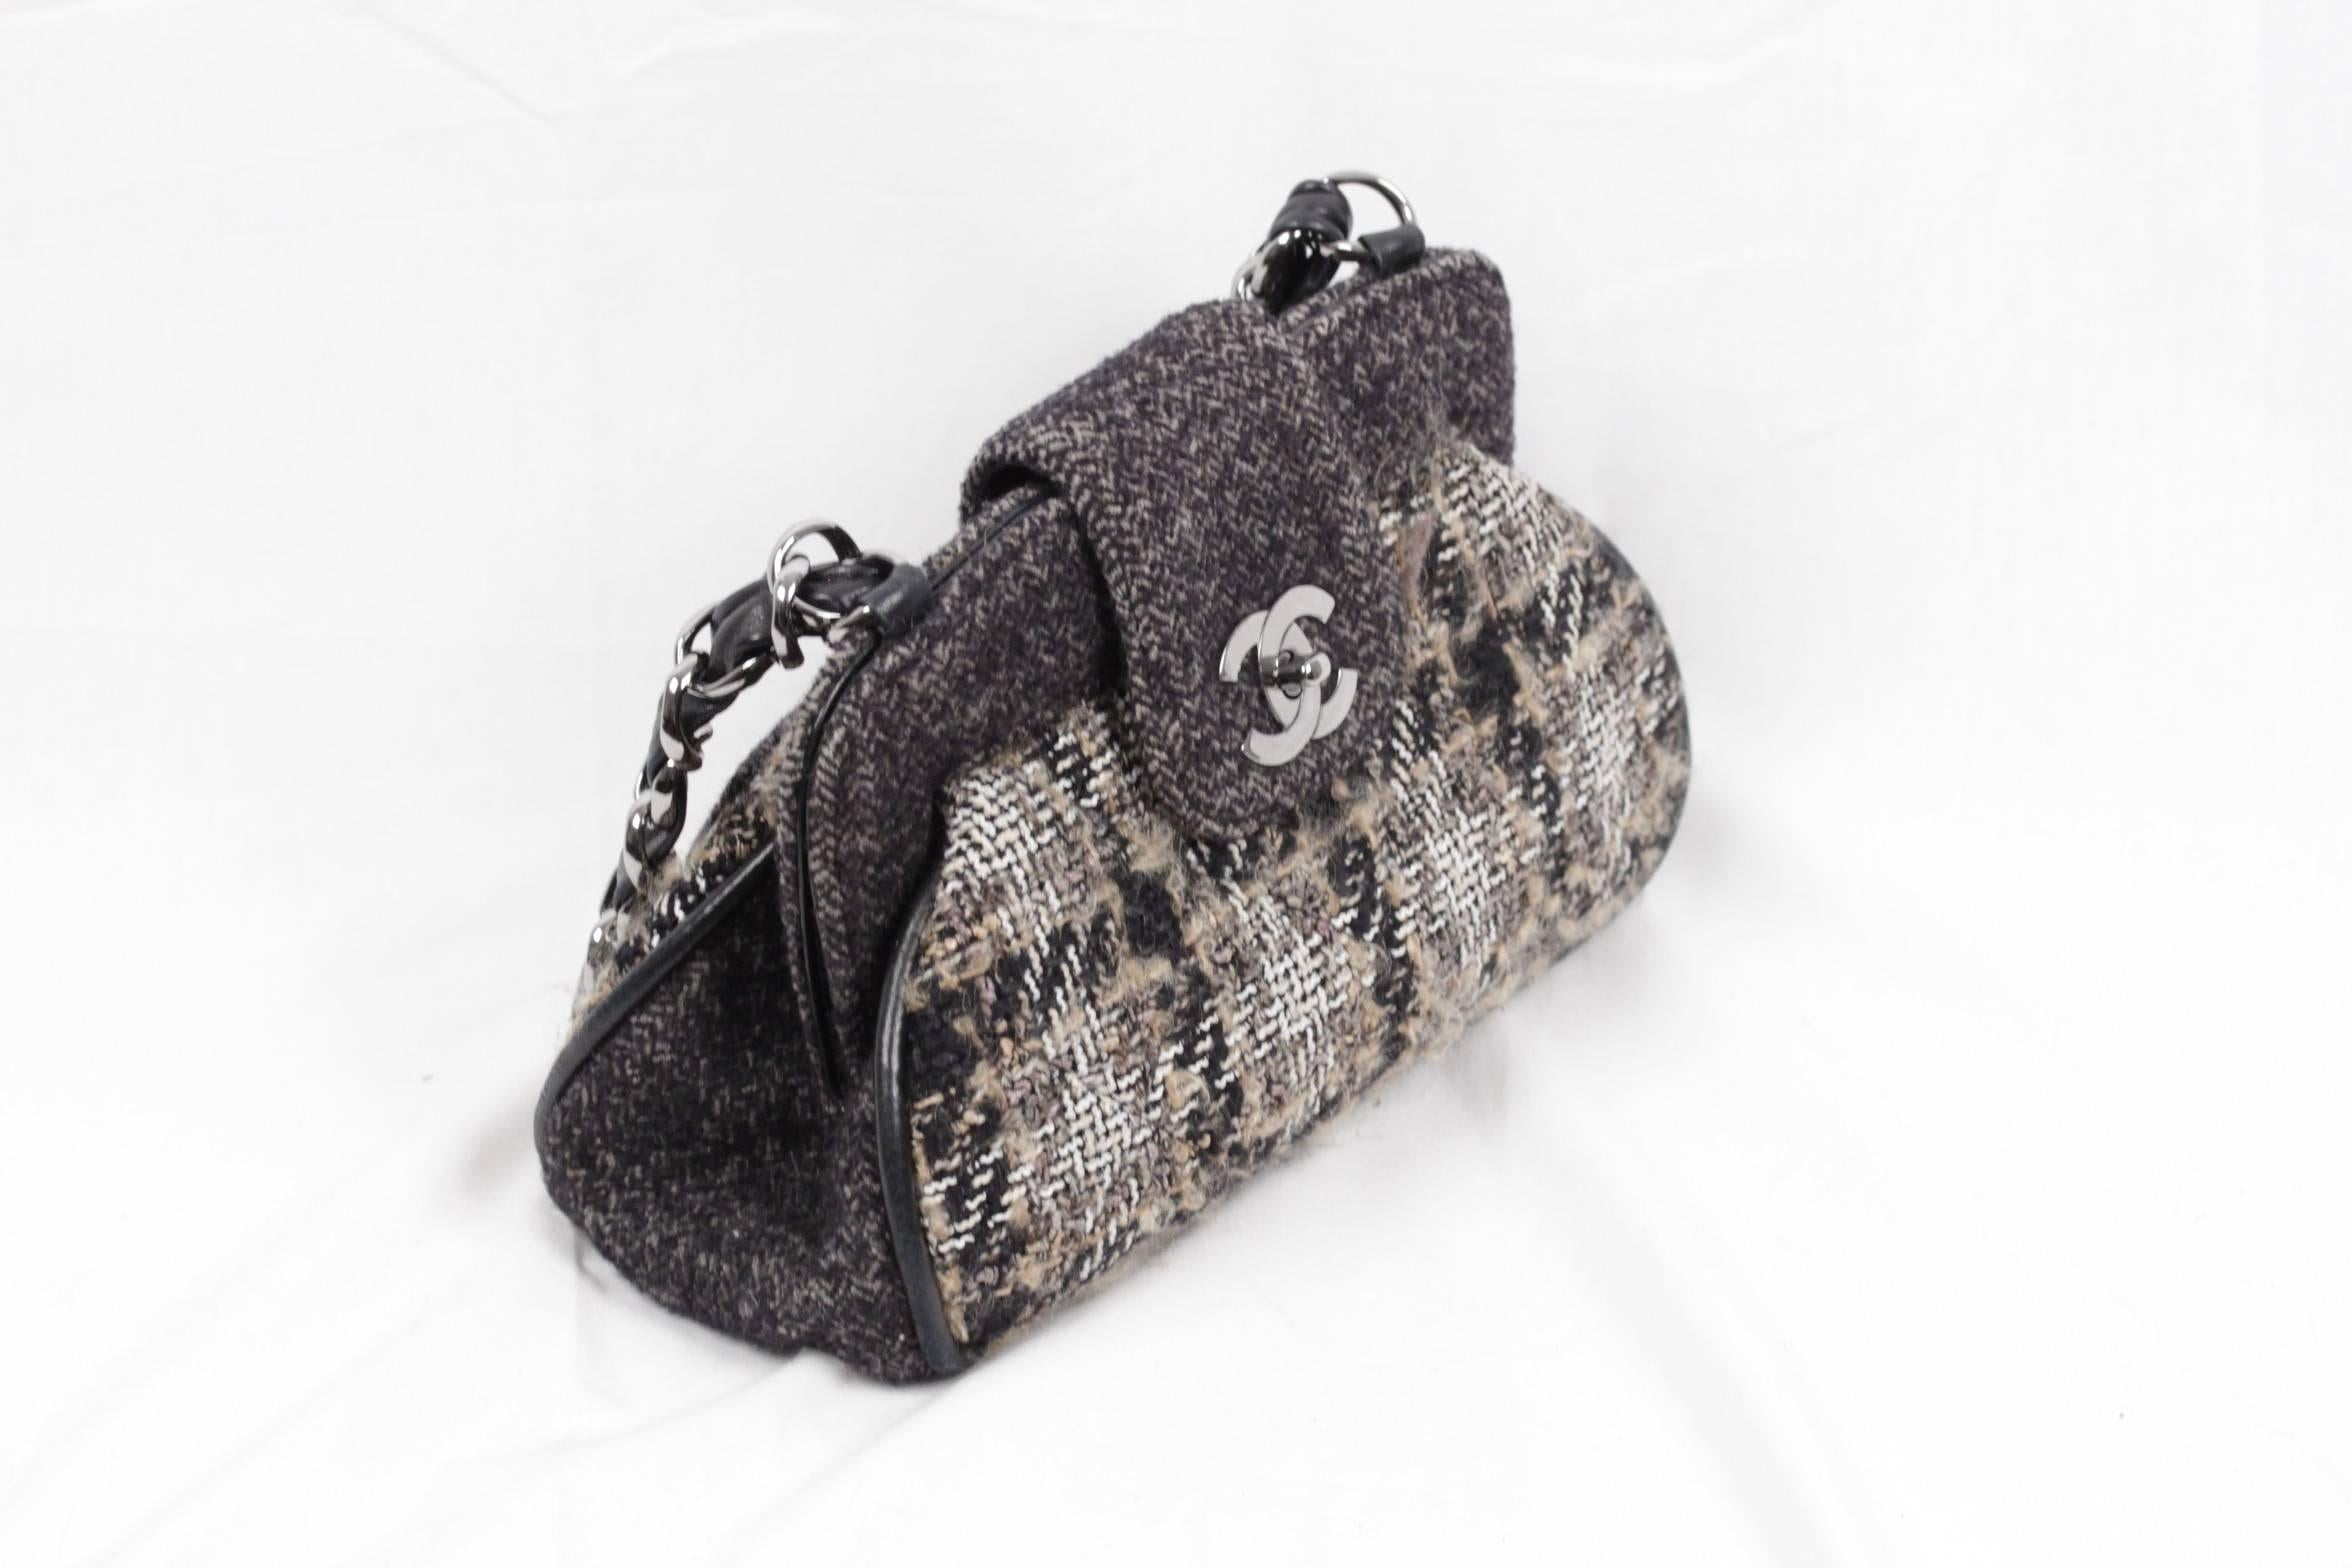 
- CHANEL Tweed Frame Bag
- Crafted of tweed and fine wool
- The bag features a large linked silver leather threaded shoulder strap
- Fold-over strap with CC CHANEL twist closure
-1 patch pocket on the back
- Black fabric lining
- 1 side zip